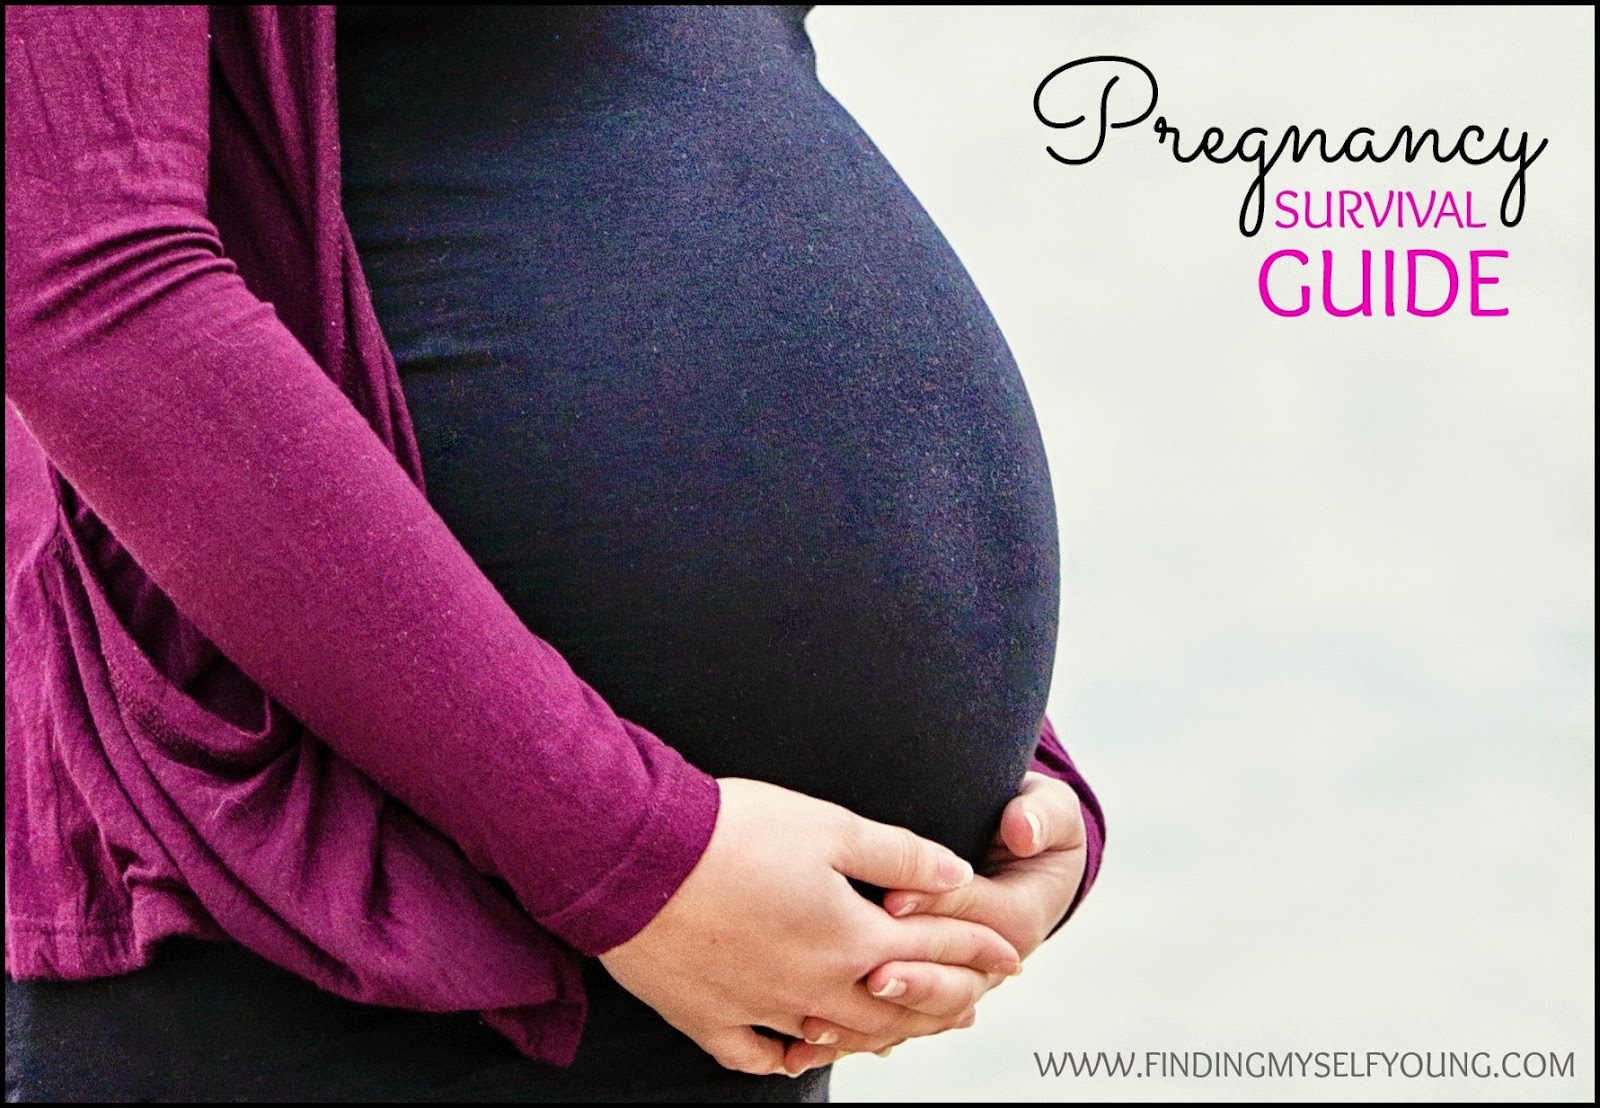 10 tips to survive pregnancy.